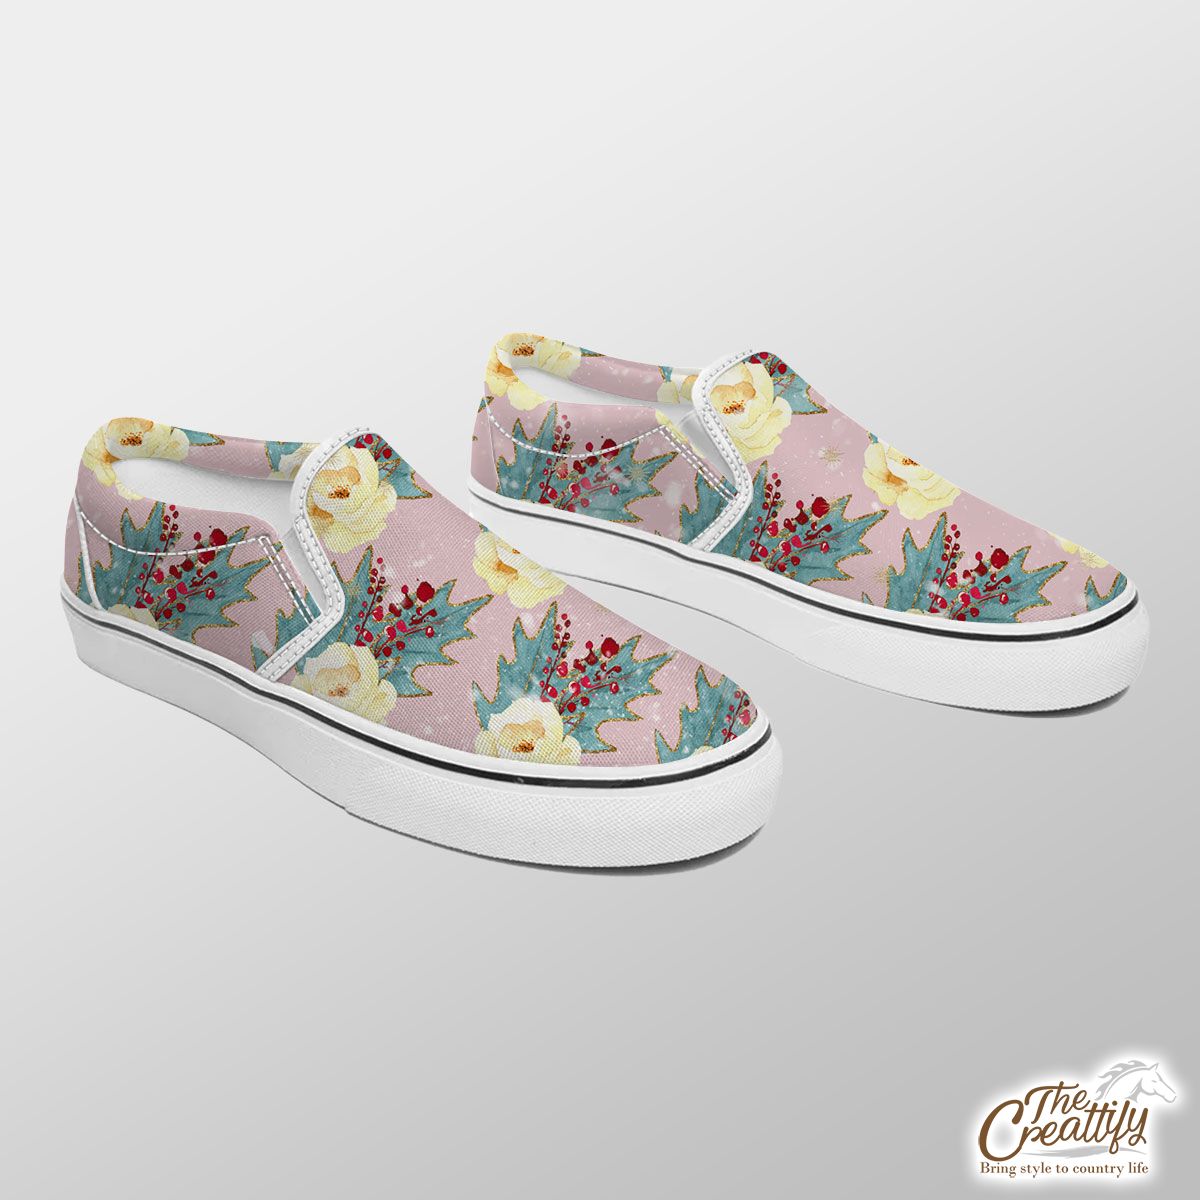 Floral And Holly Leaf Pattern Slip On Sneakers